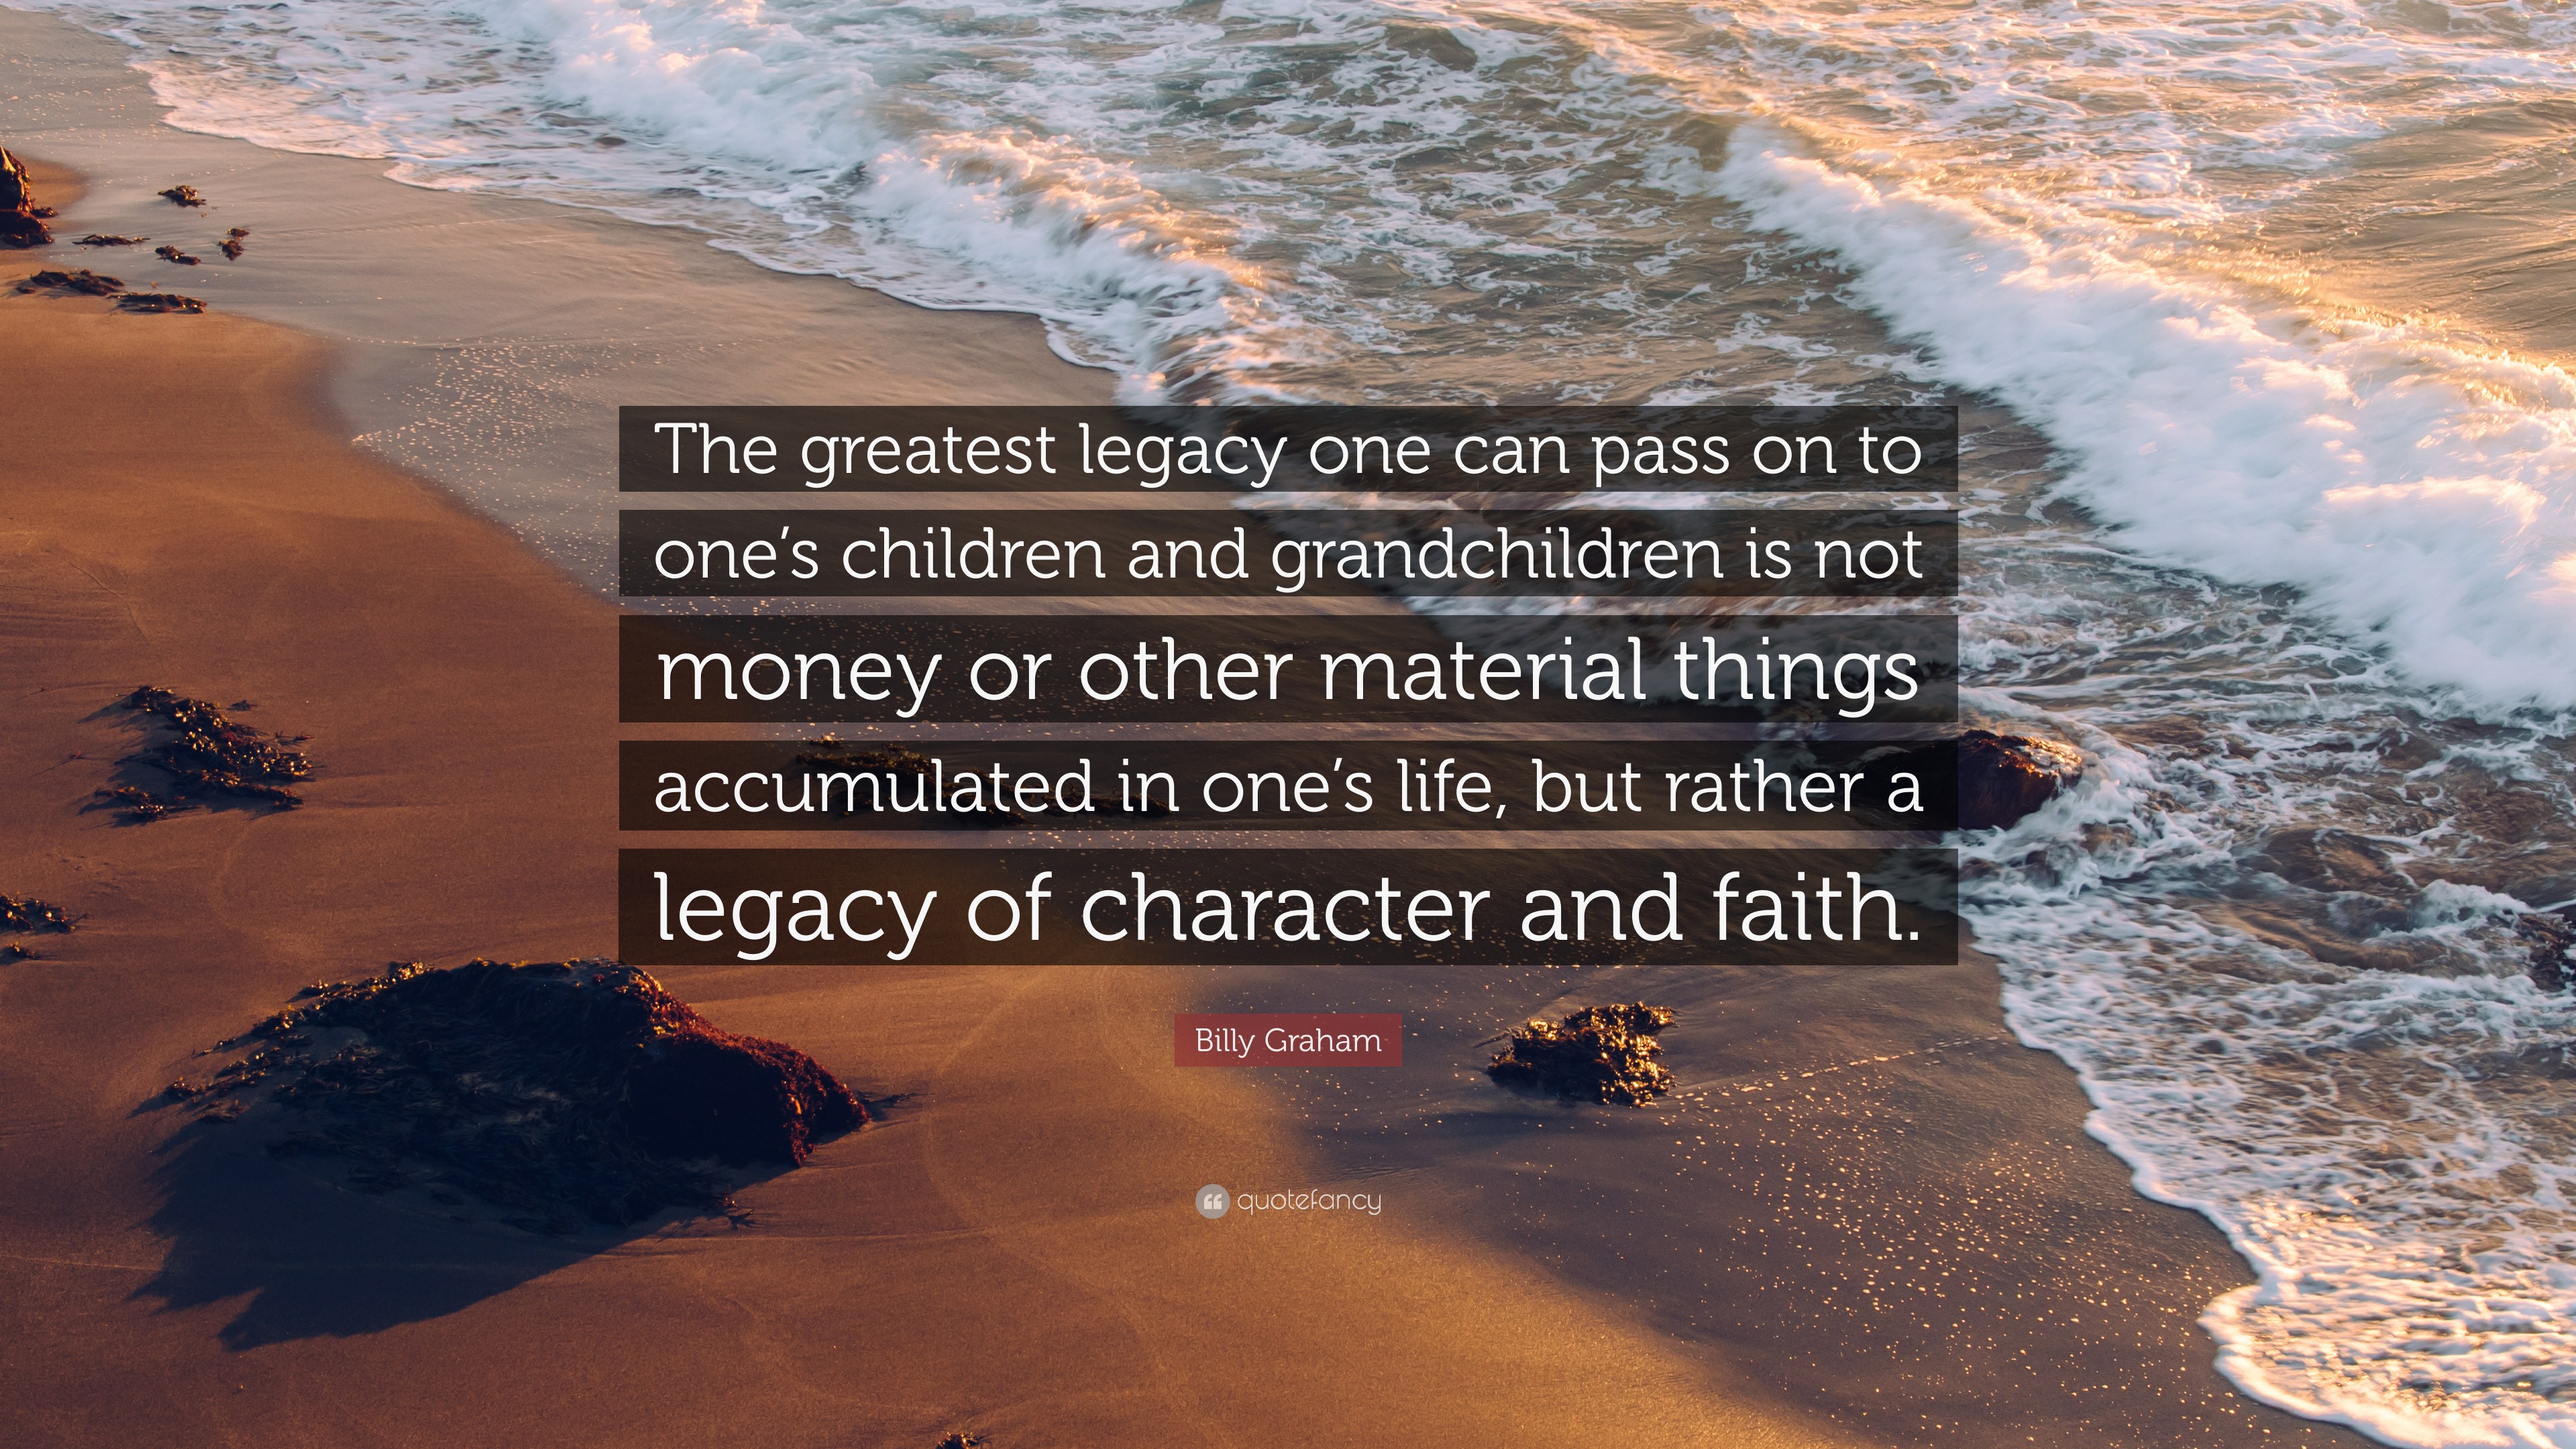 Billy Graham Quote: “The greatest legacy one can pass on to one's children  and grandchildren is not money or other material things accumulate...”